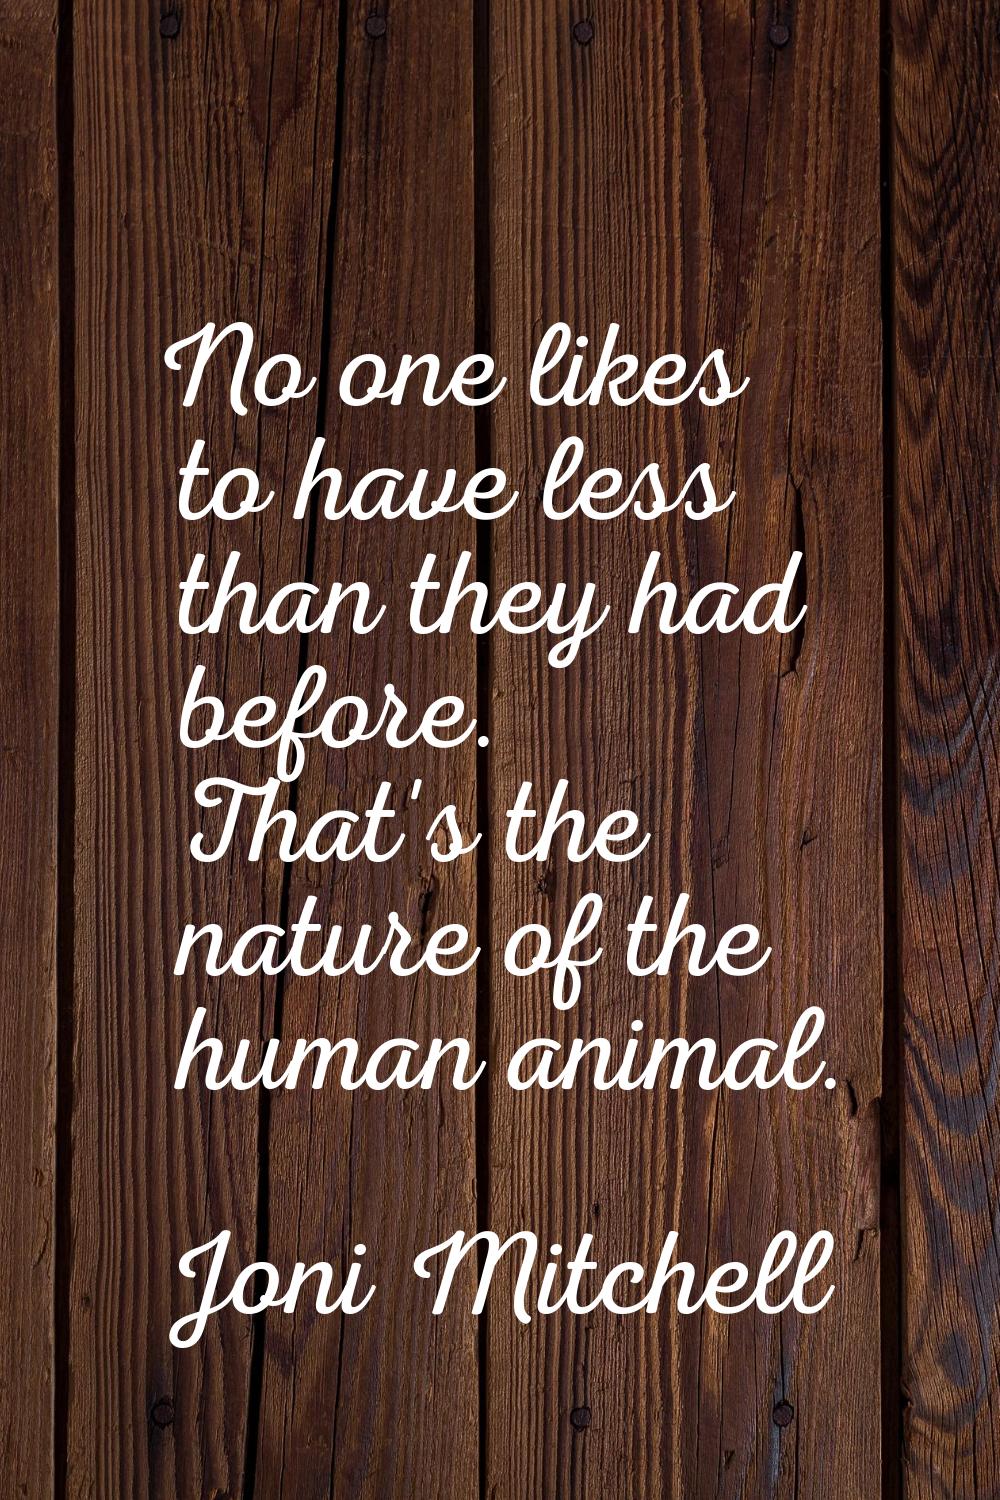 No one likes to have less than they had before. That's the nature of the human animal.